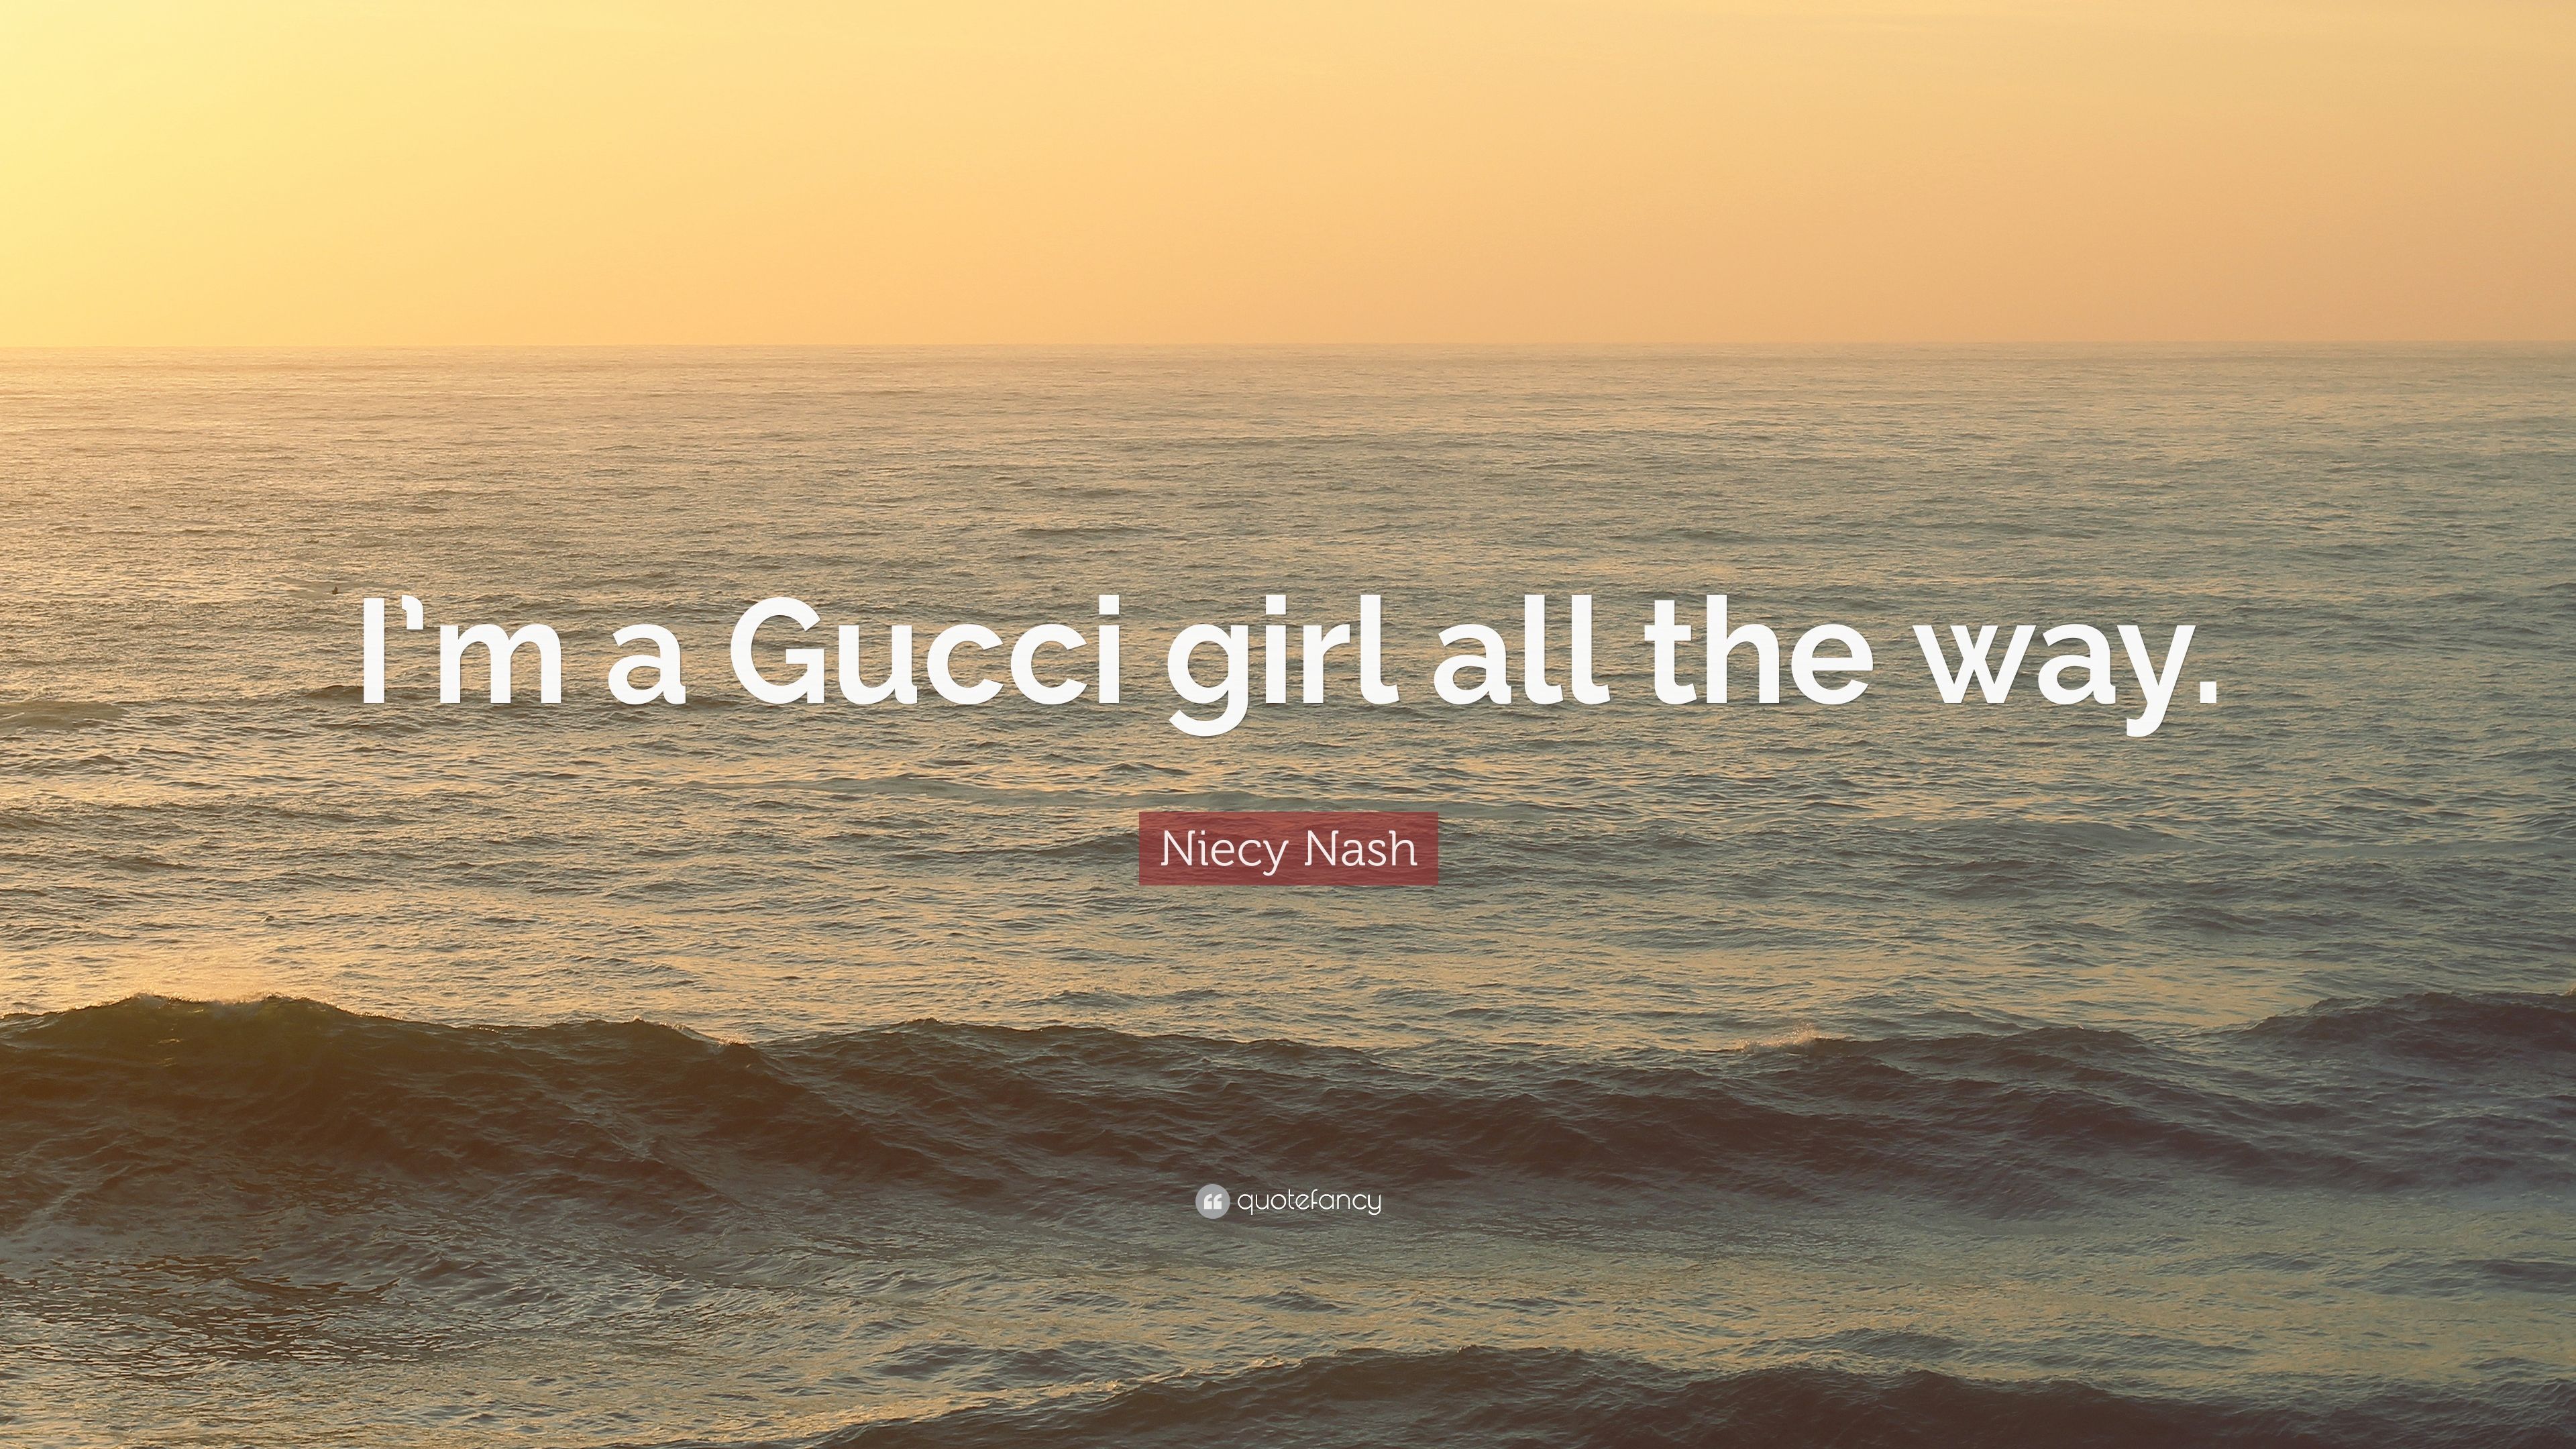 Niecy Nash Quote: “I'm a Gucci girl all the way.” (7 wallpaper)